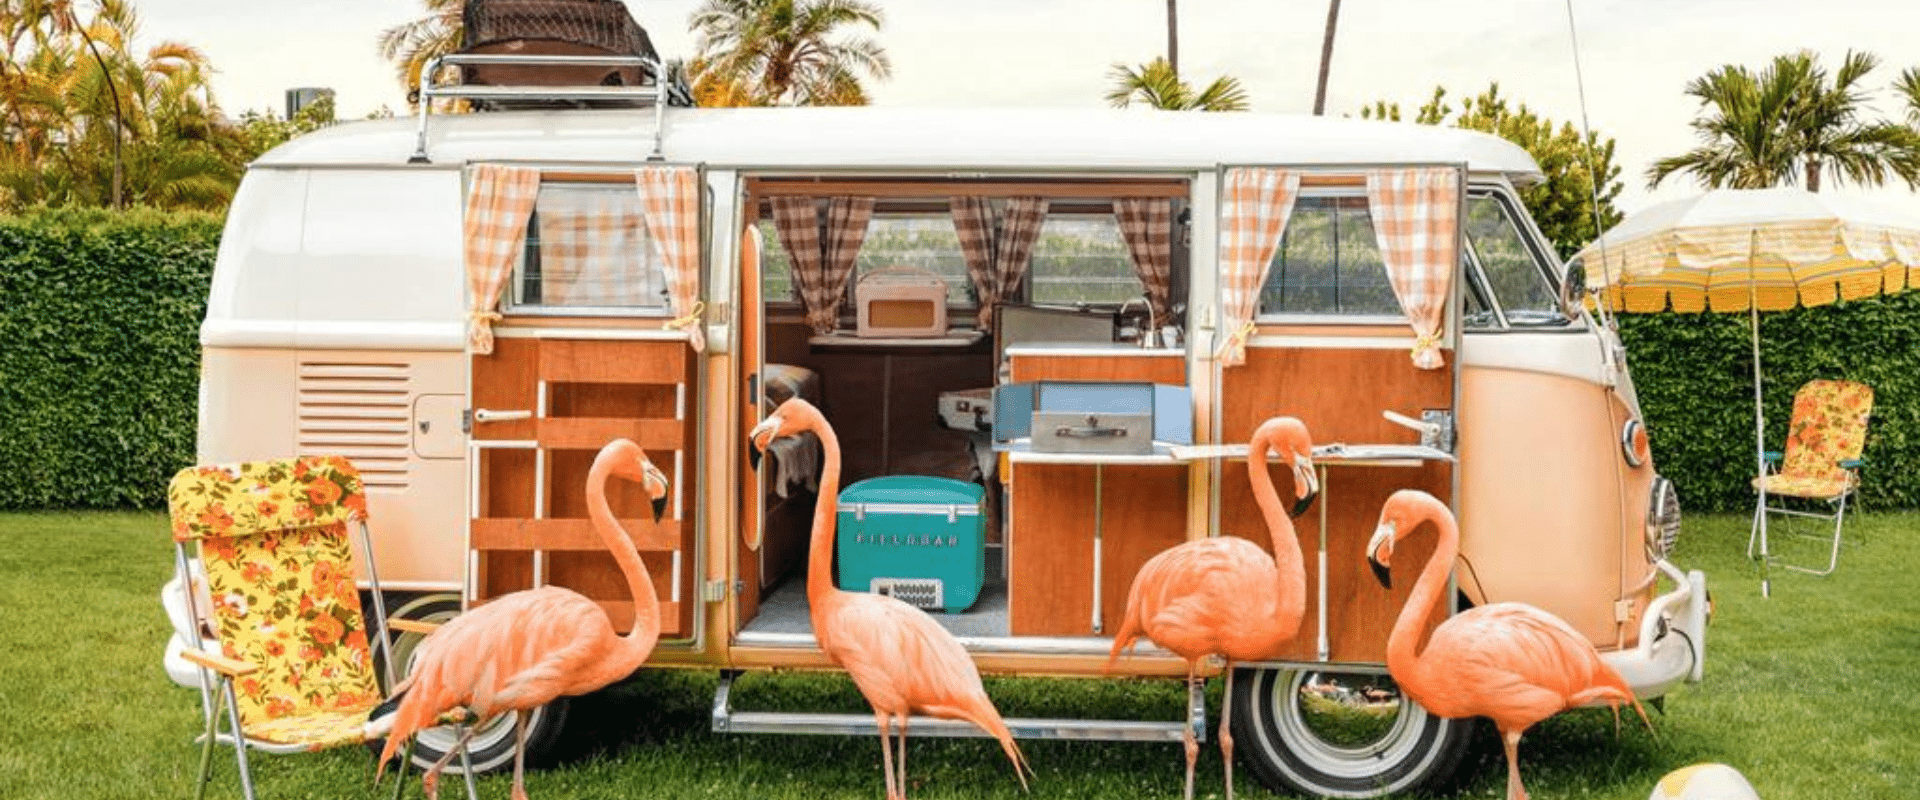 A pink vw camper van with flamingos sitting in the grass.